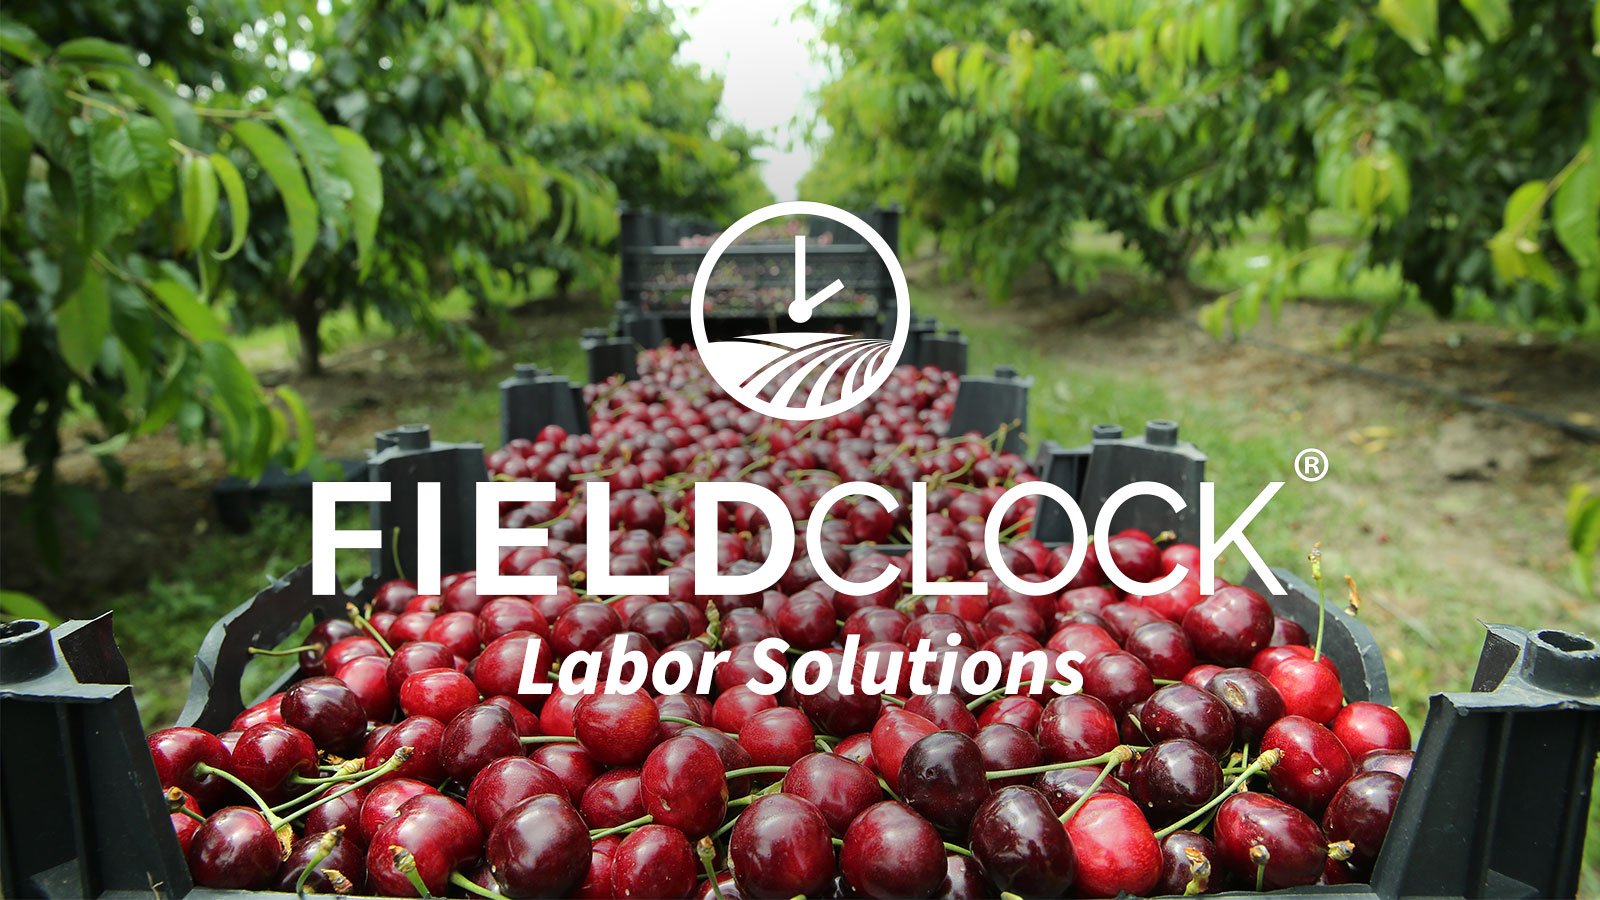 FieldClock Labor Solutions started with cherries but has expanded to service farmers of all crops